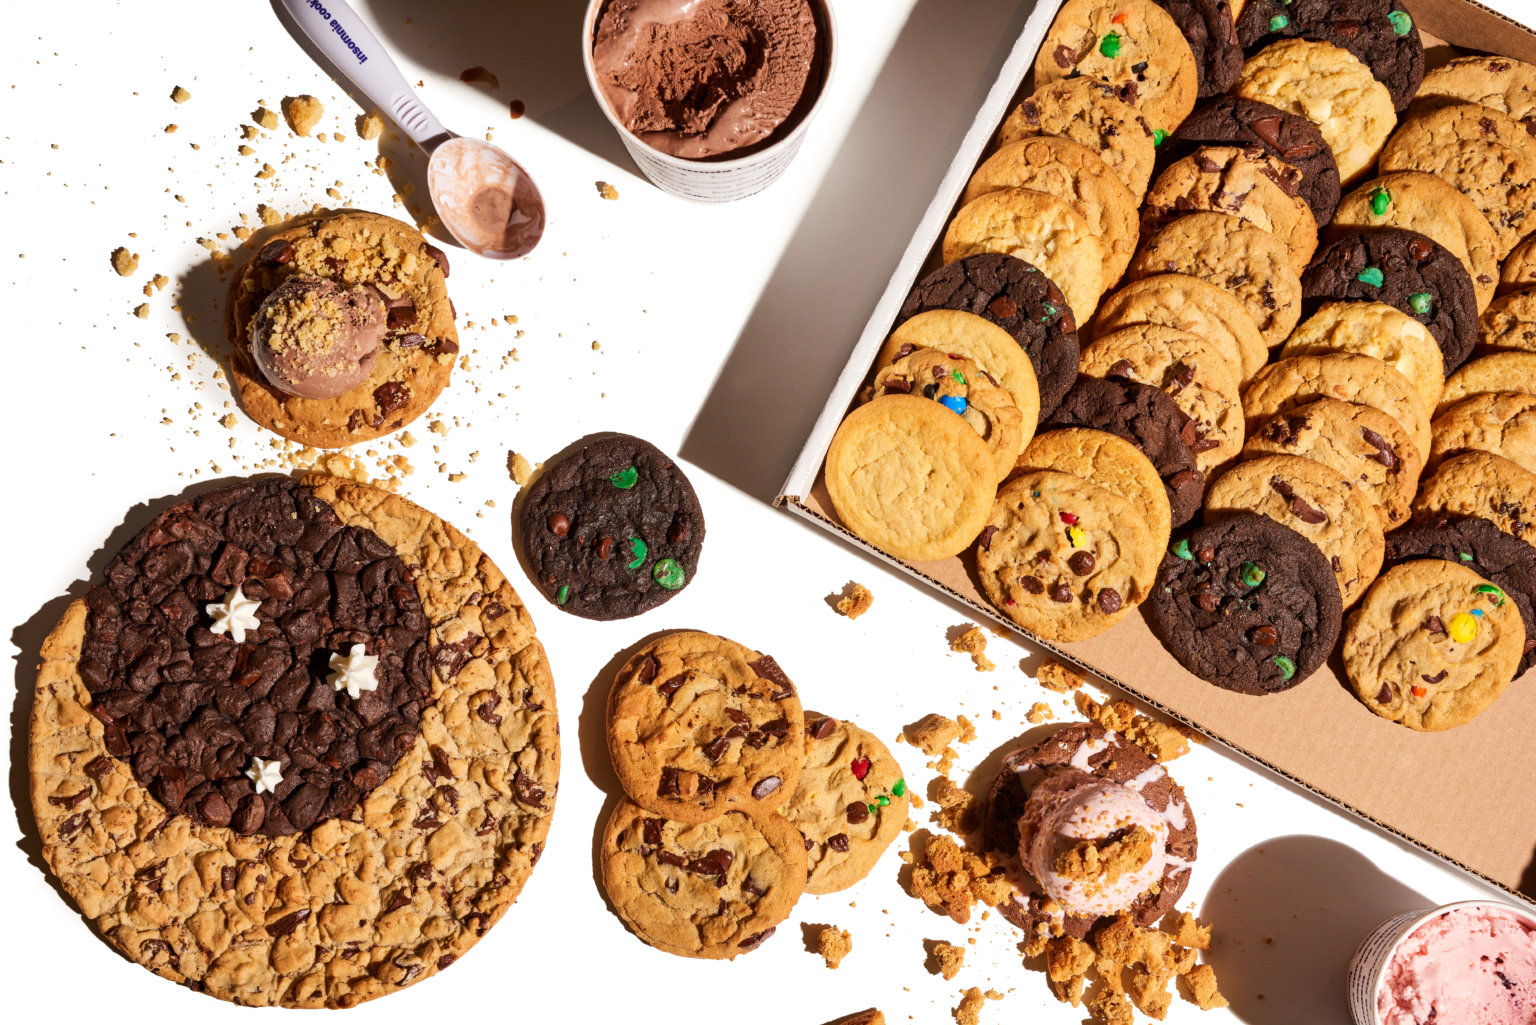 Cookie chain Insomnia Cookies to start year on sweet note by offering